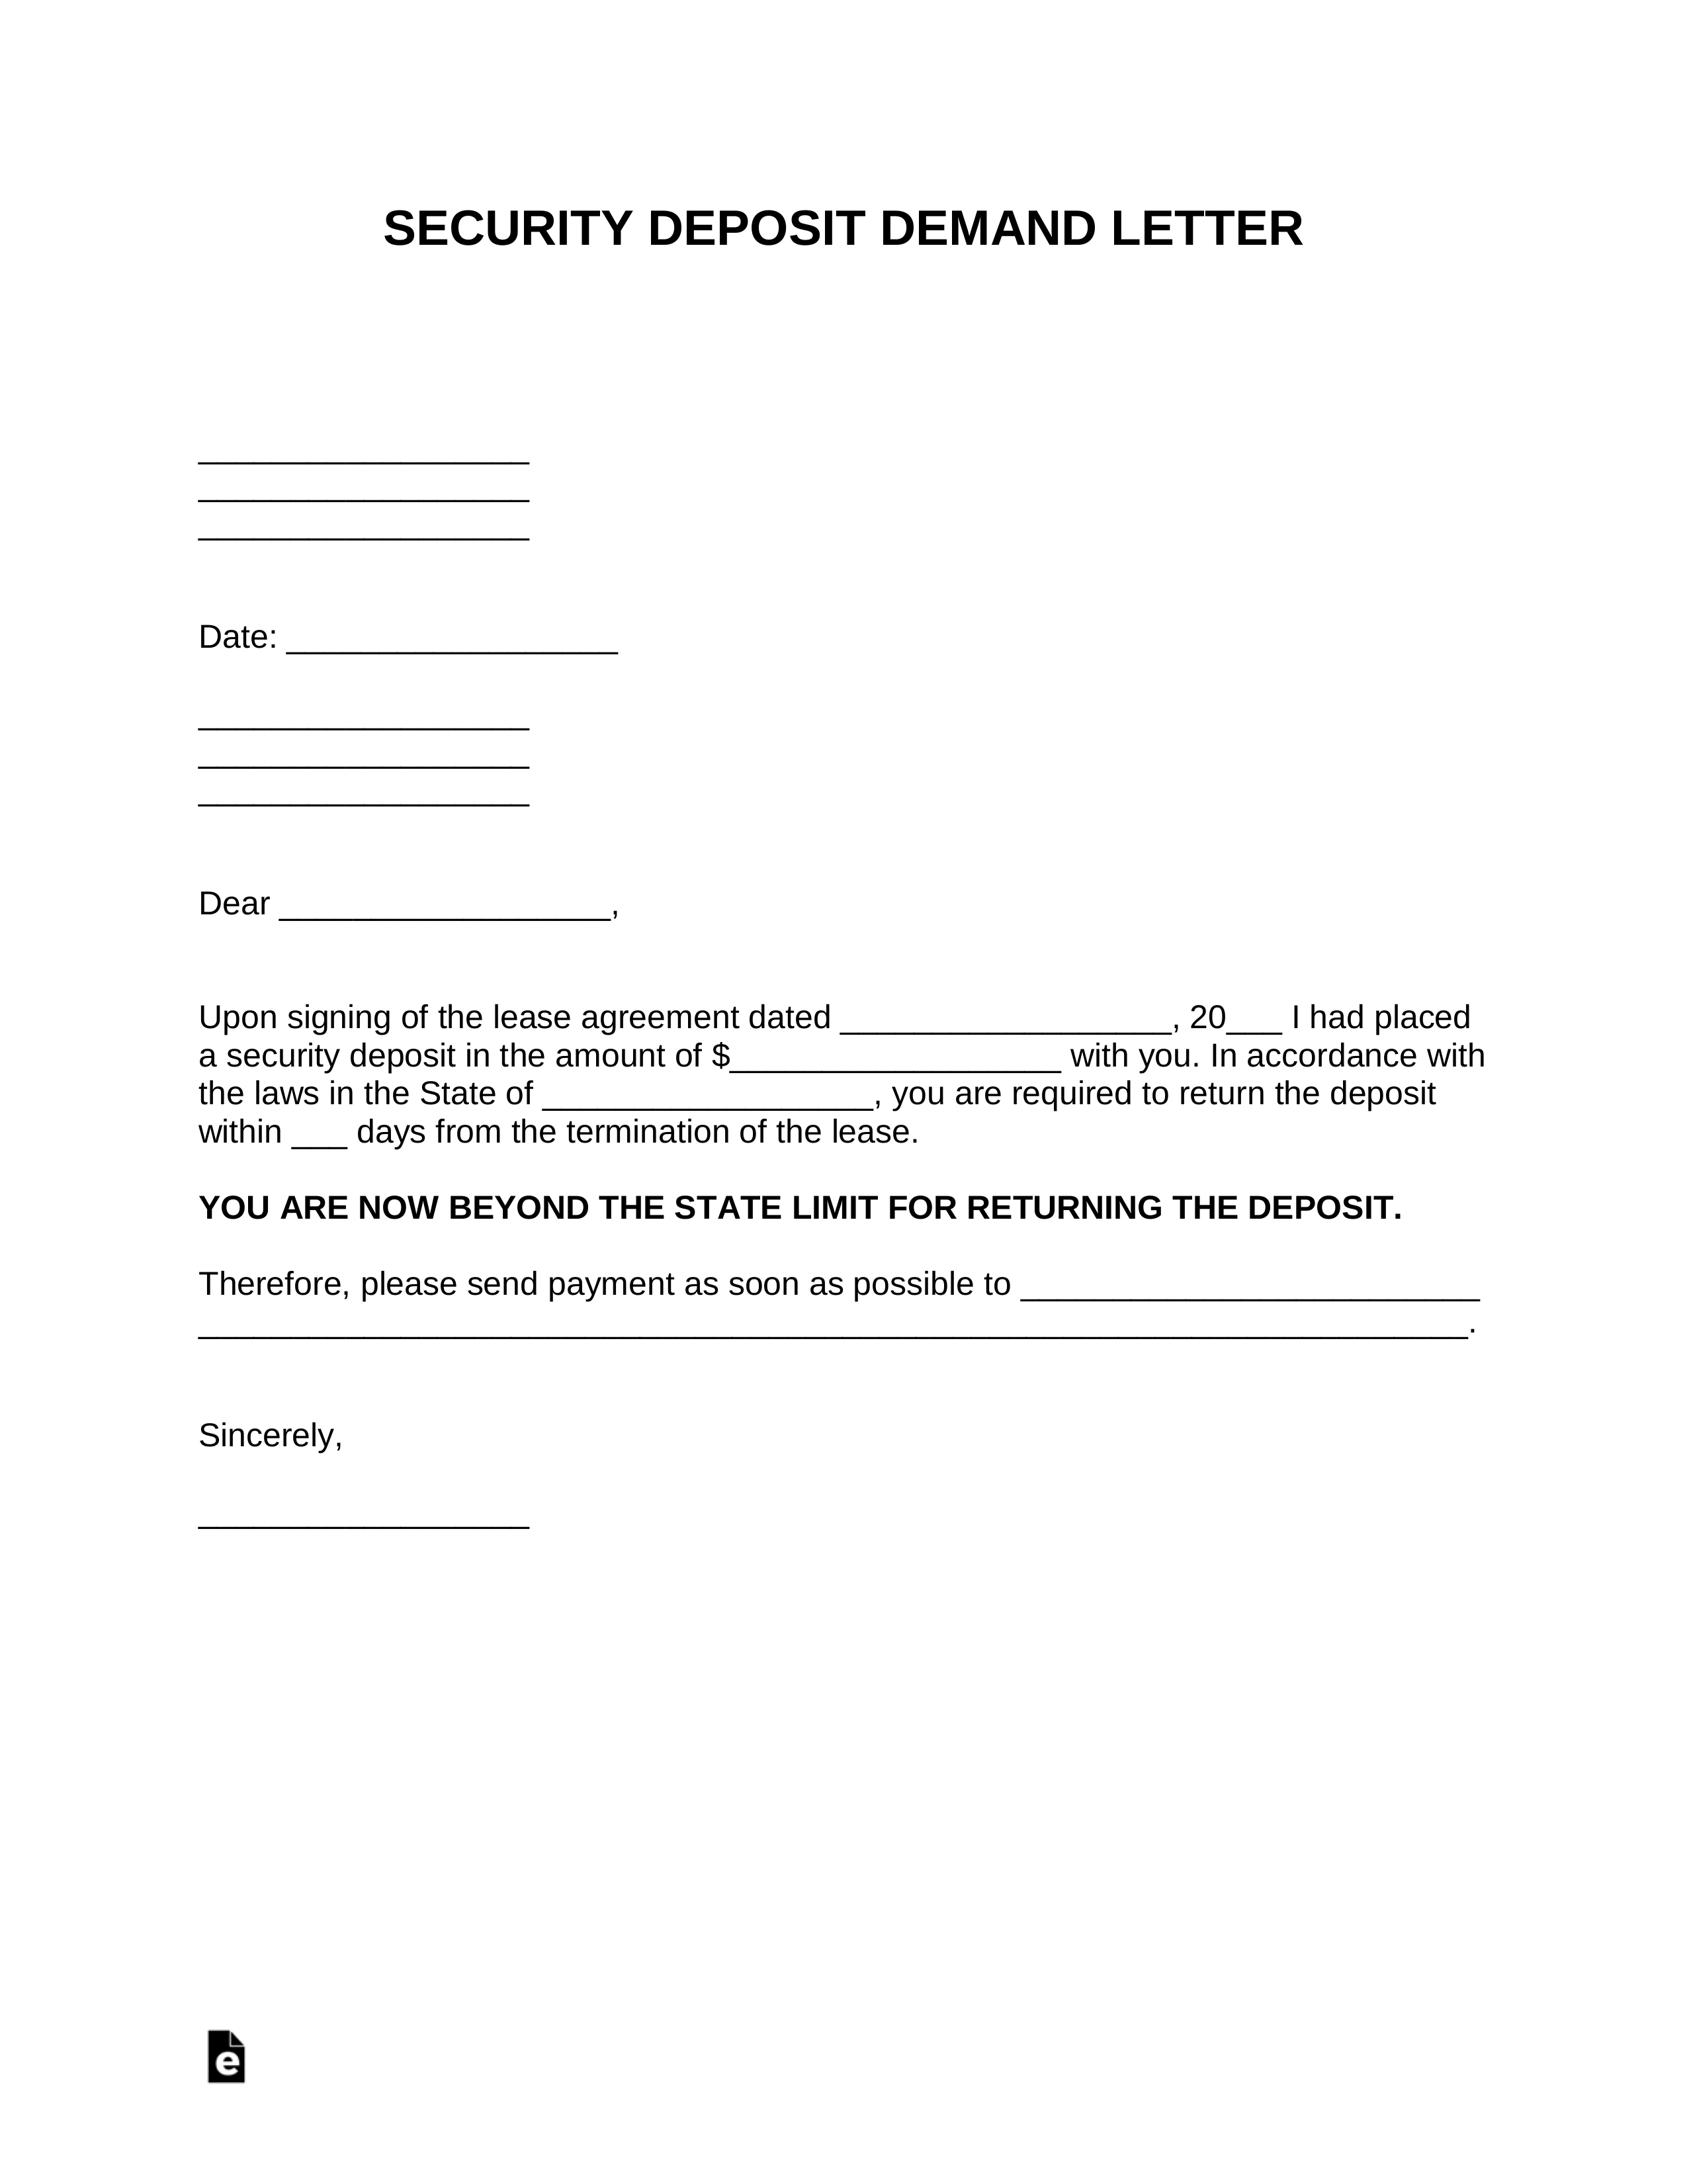 Free Security Deposit Demand Letter Template - PDF  Word – eForms Throughout Landlord Security Deposit Return Form Inside Landlord Security Deposit Return Form